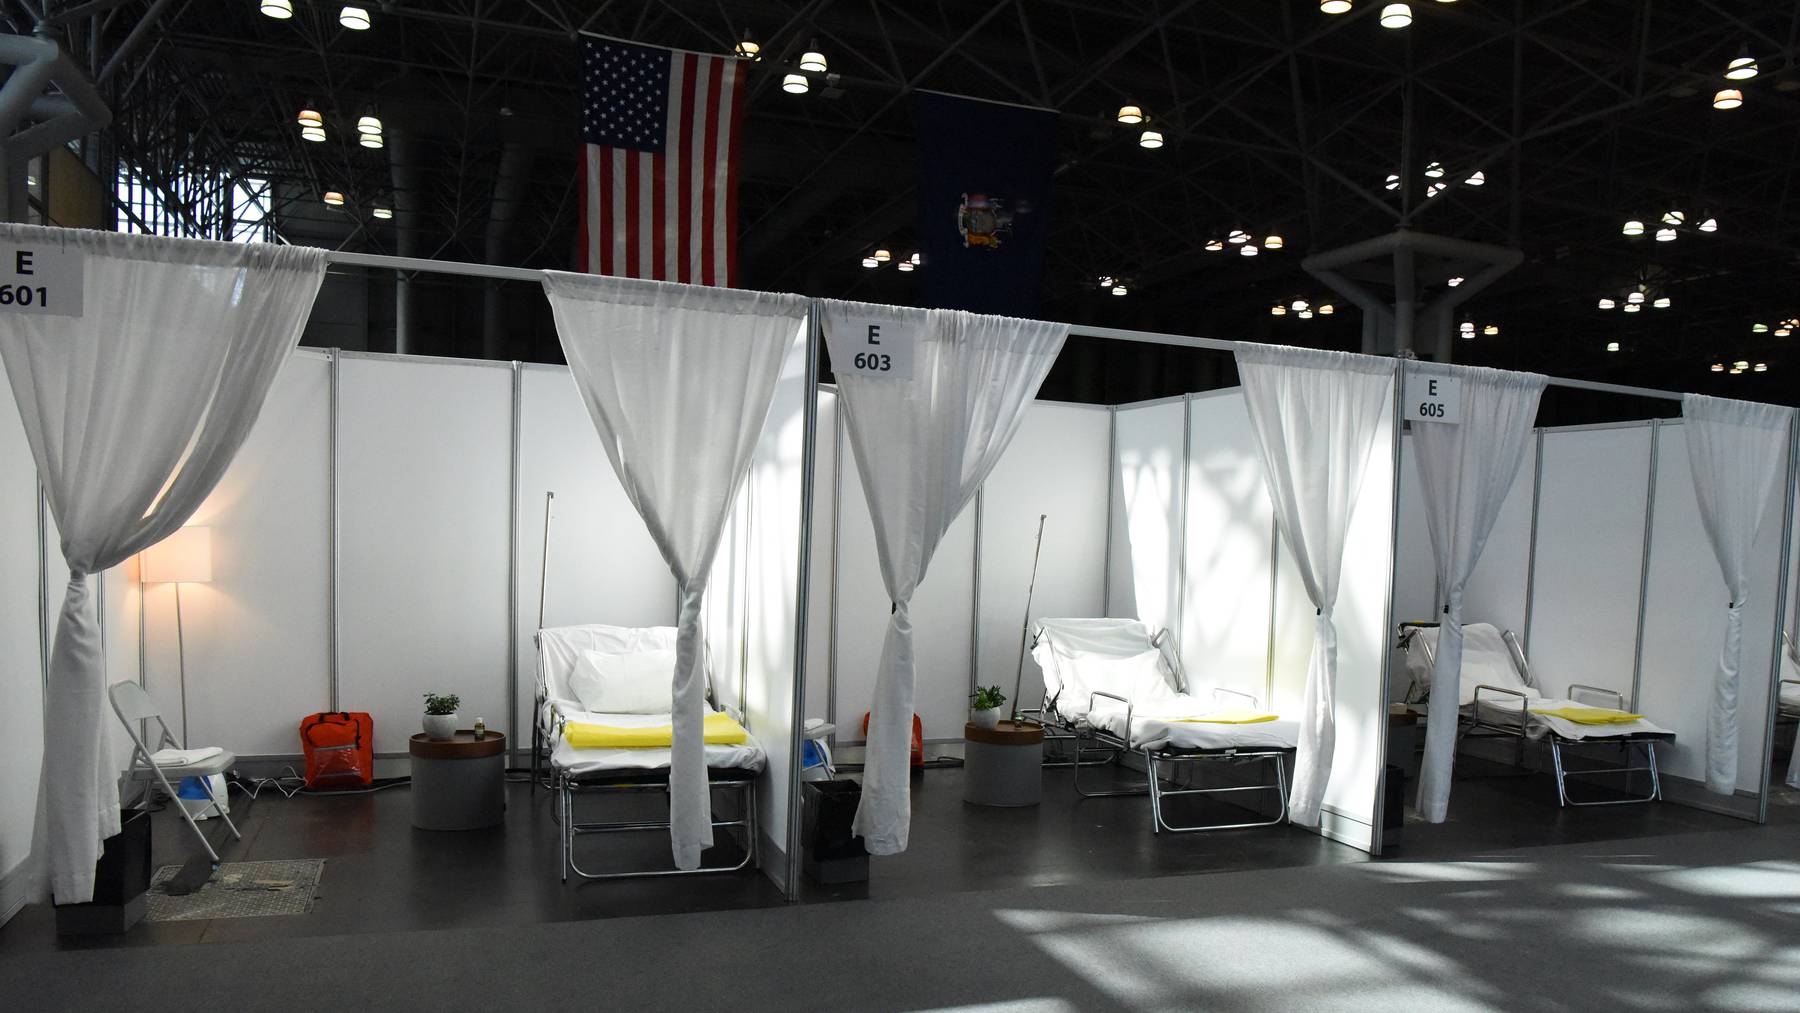 Home to the National Retail Federation Conference, the Jacob Javits Center in New York City was converted to an Army Corps of Engineers field hospital as case counts in New York City spiked. New York National Guard.